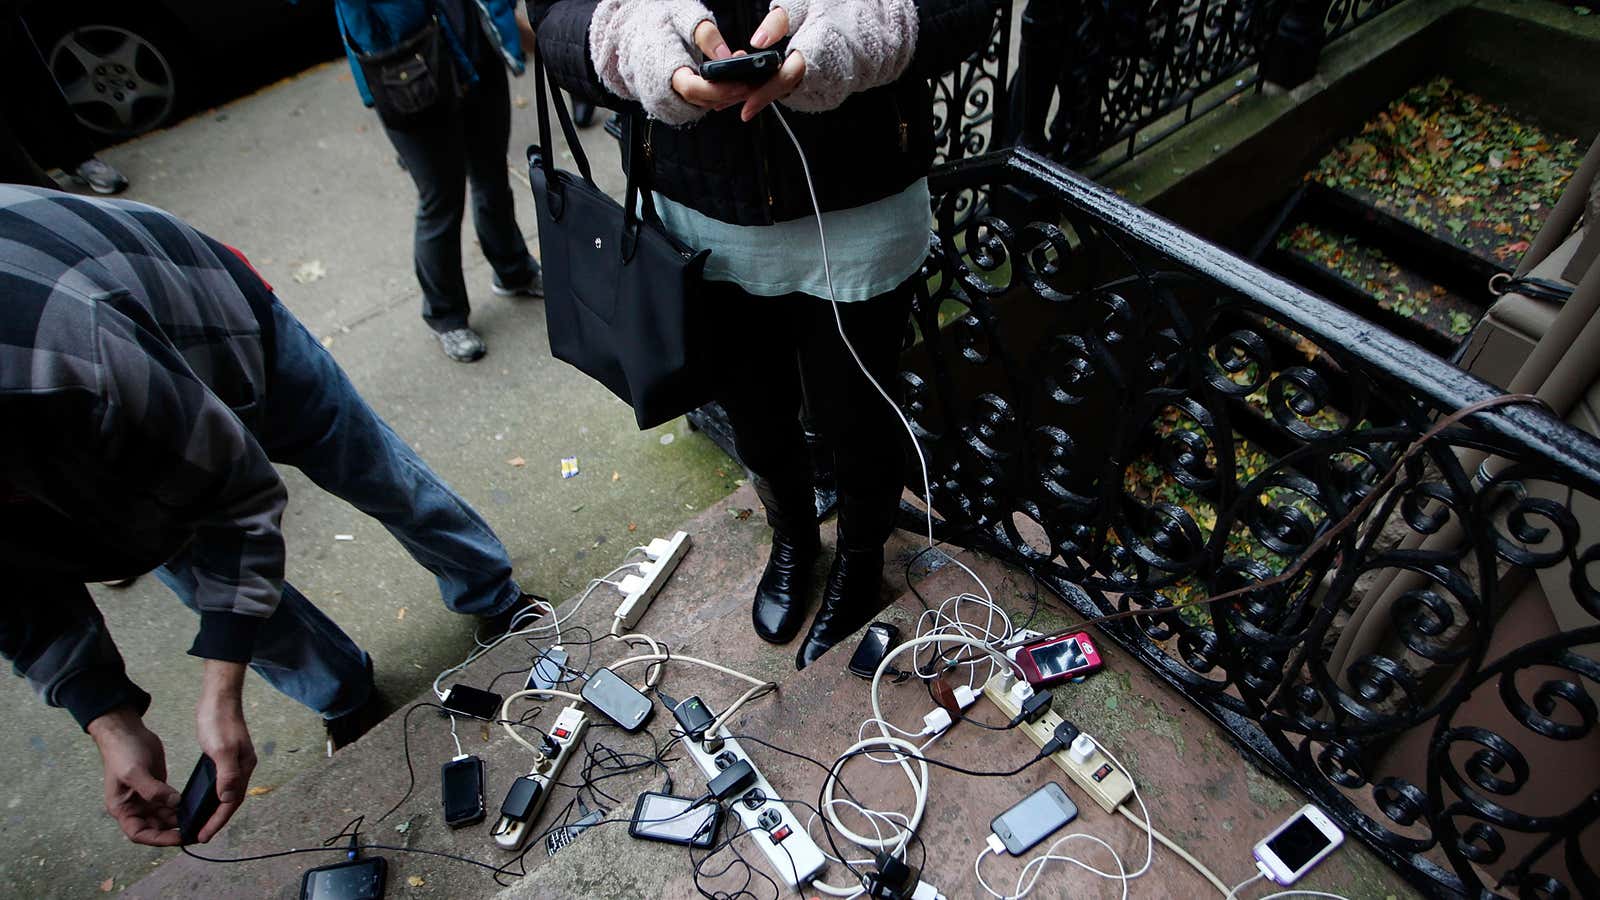 A good samaritan provides electricity for storm victims to charge electronic devices in Hoboken, New Jersey.